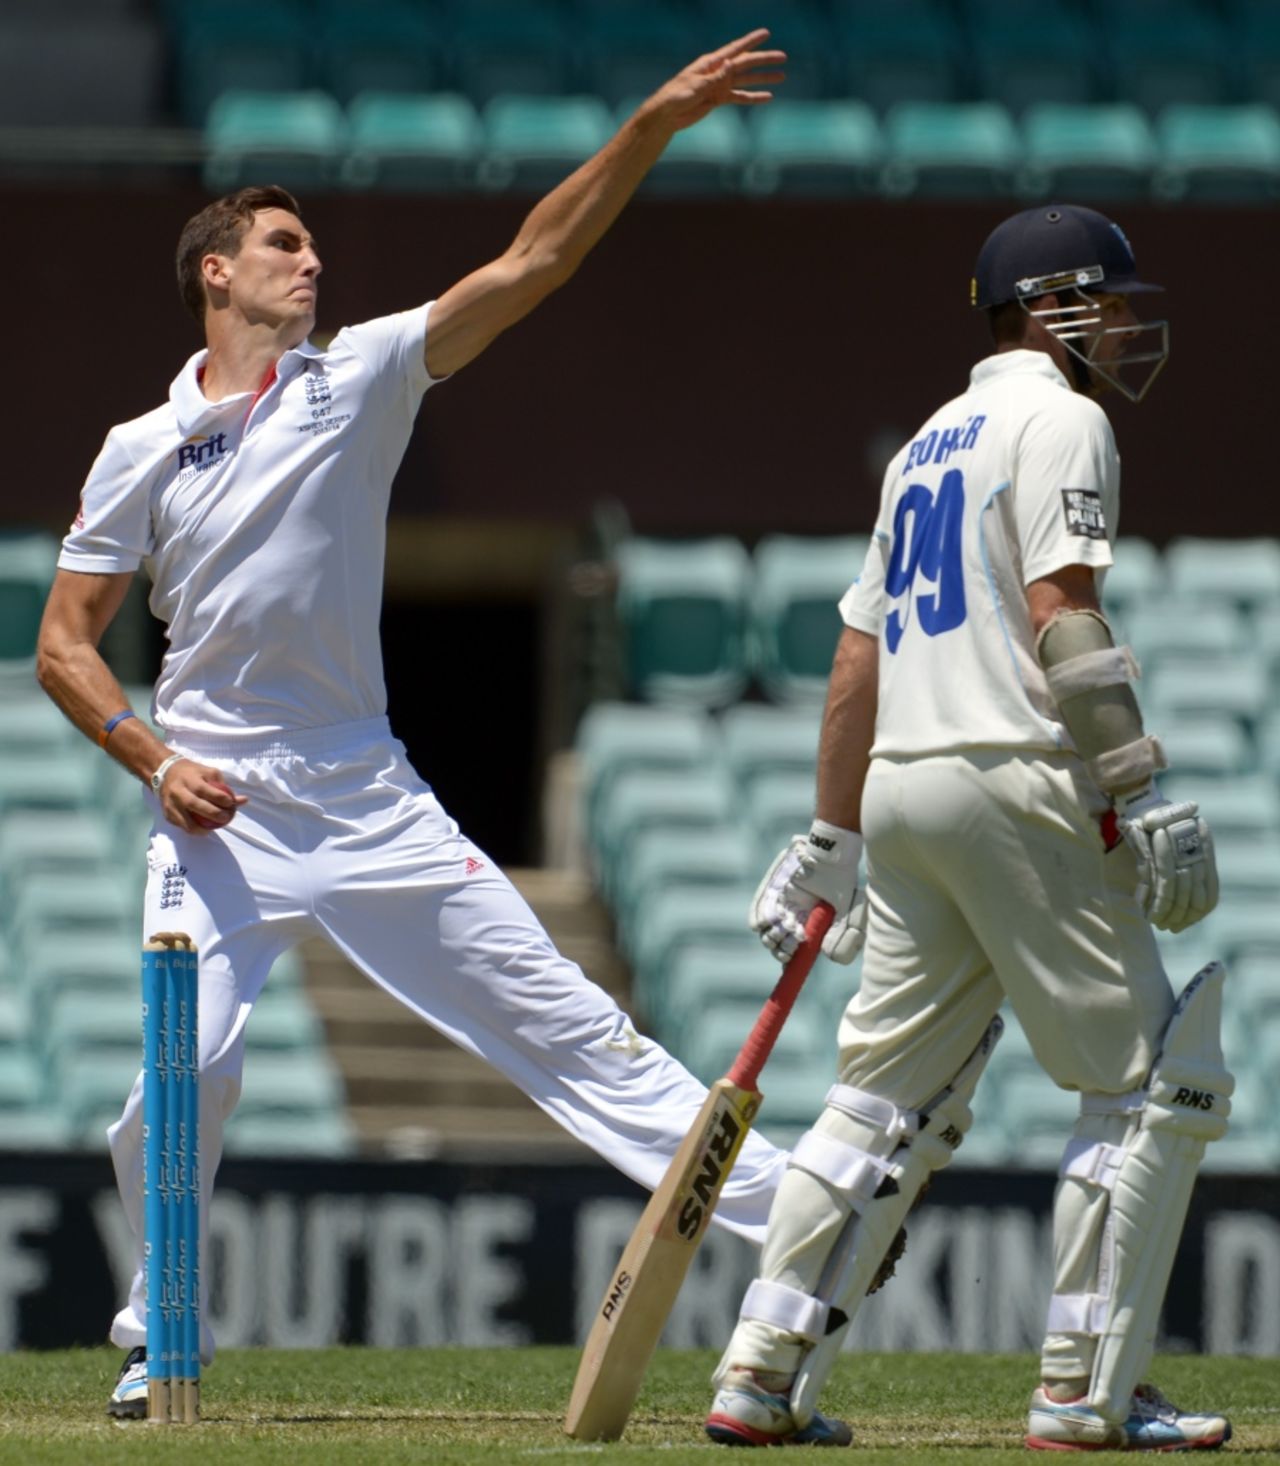 Steven Finn picked up wickets on the first day of the tour match, Cricket Australia Invitational XI v England, Sydney, 1st day, November 13, 2013